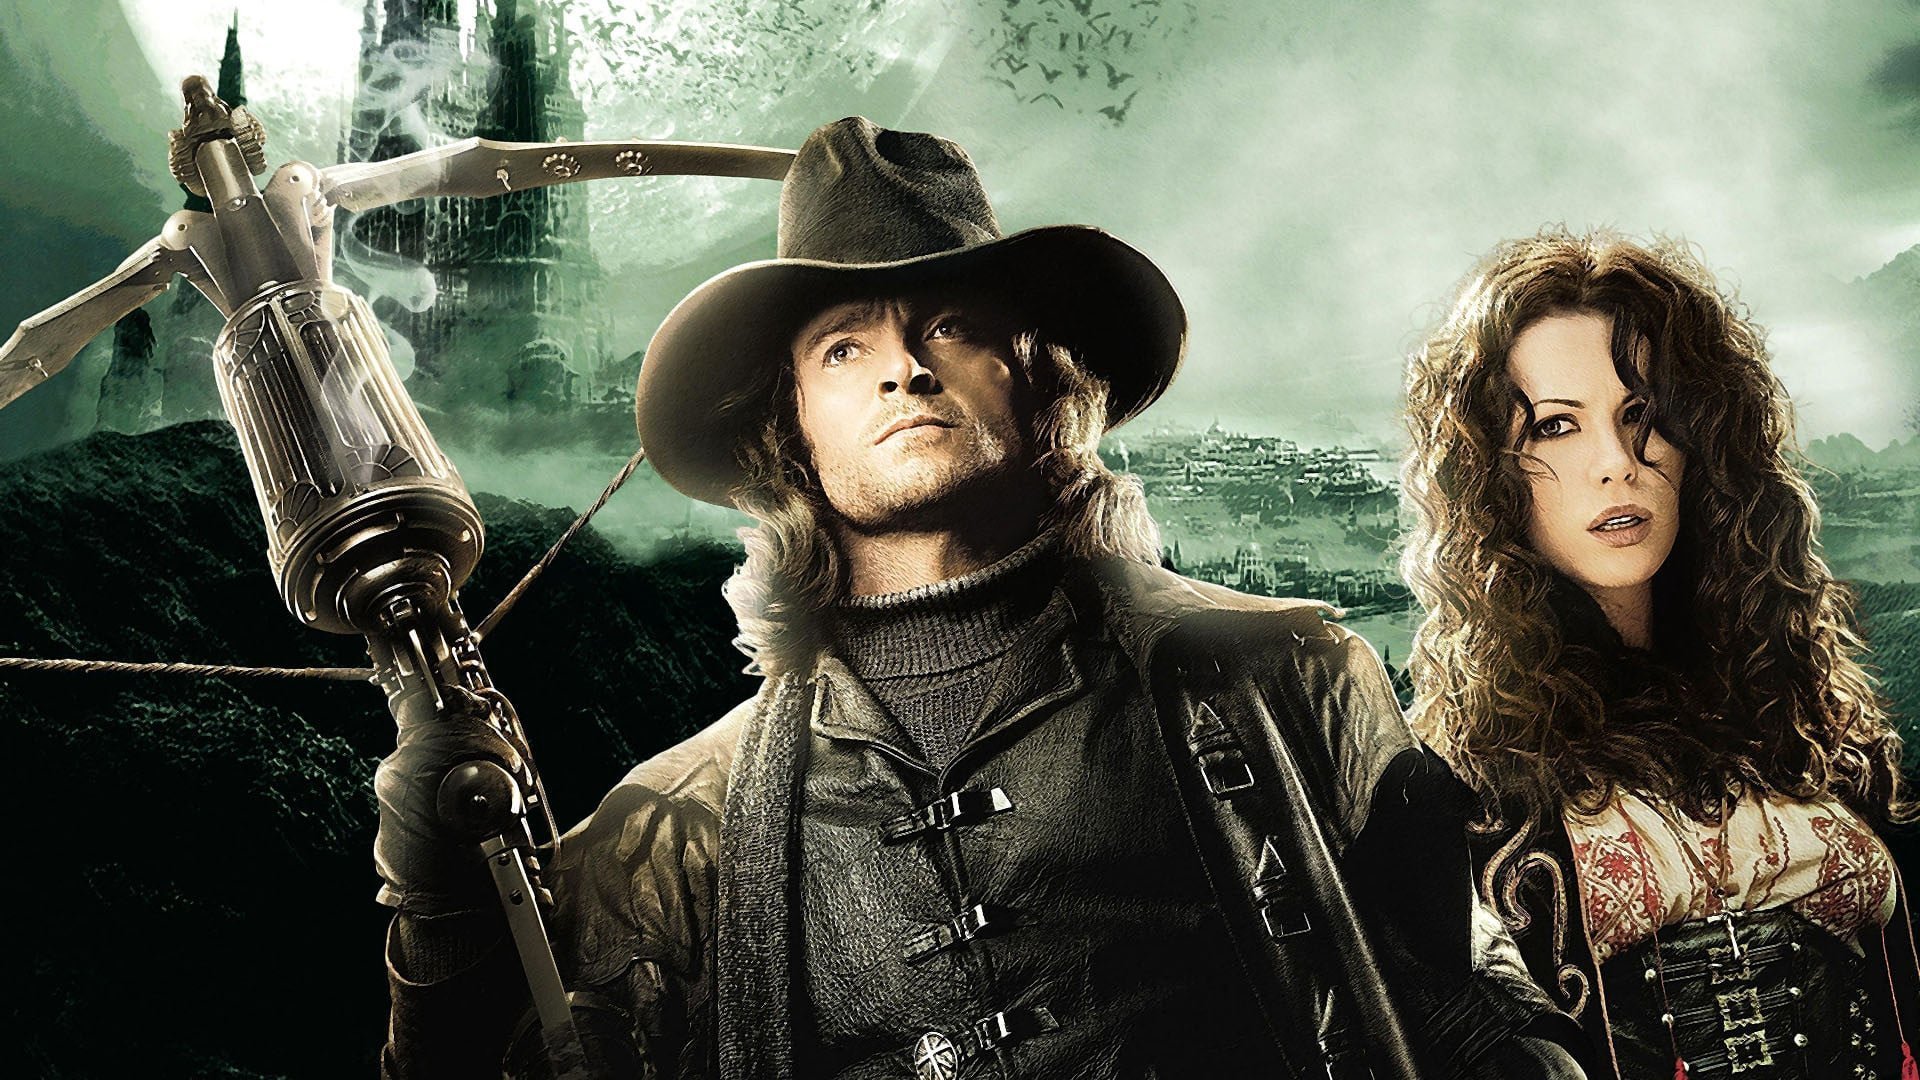 donald lacy recommends van helsing full movie free pic